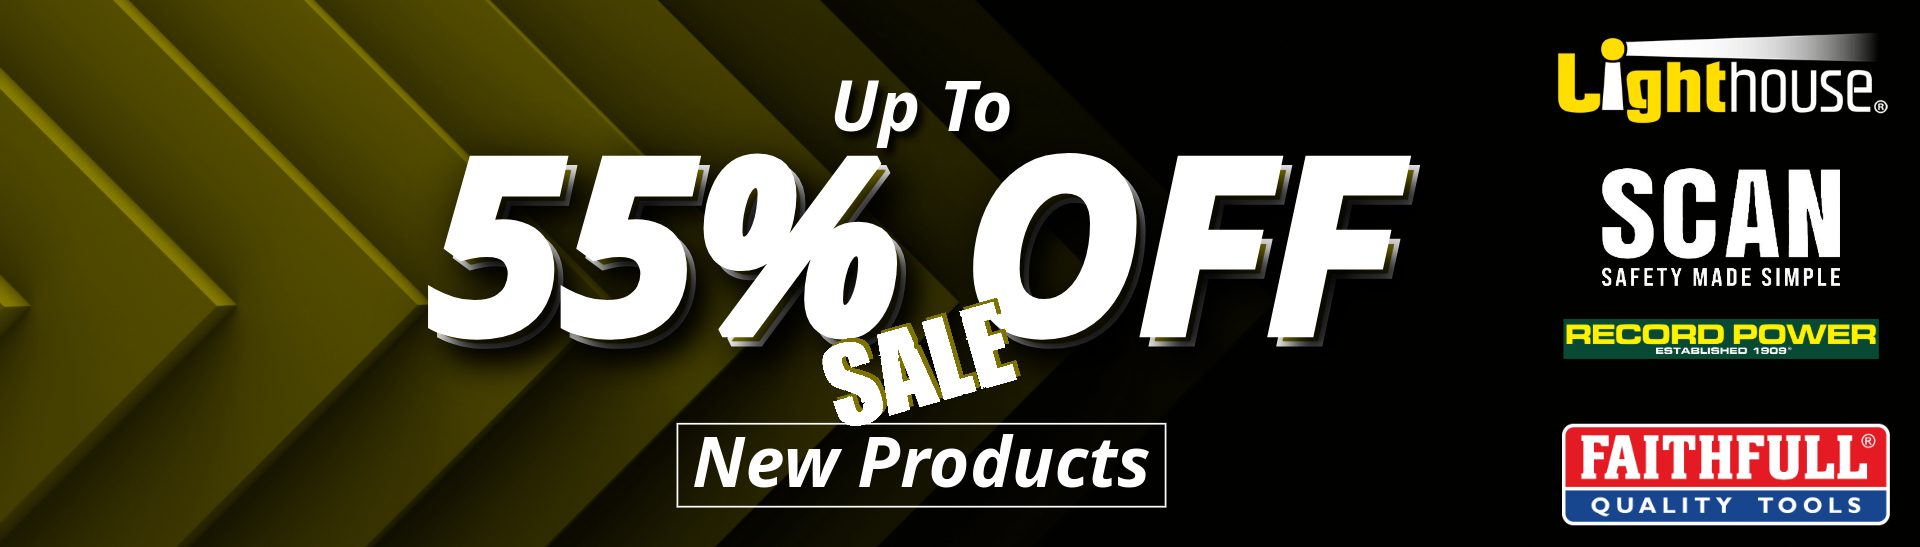 Up To 55% OFF - NEW PRODUCTS!